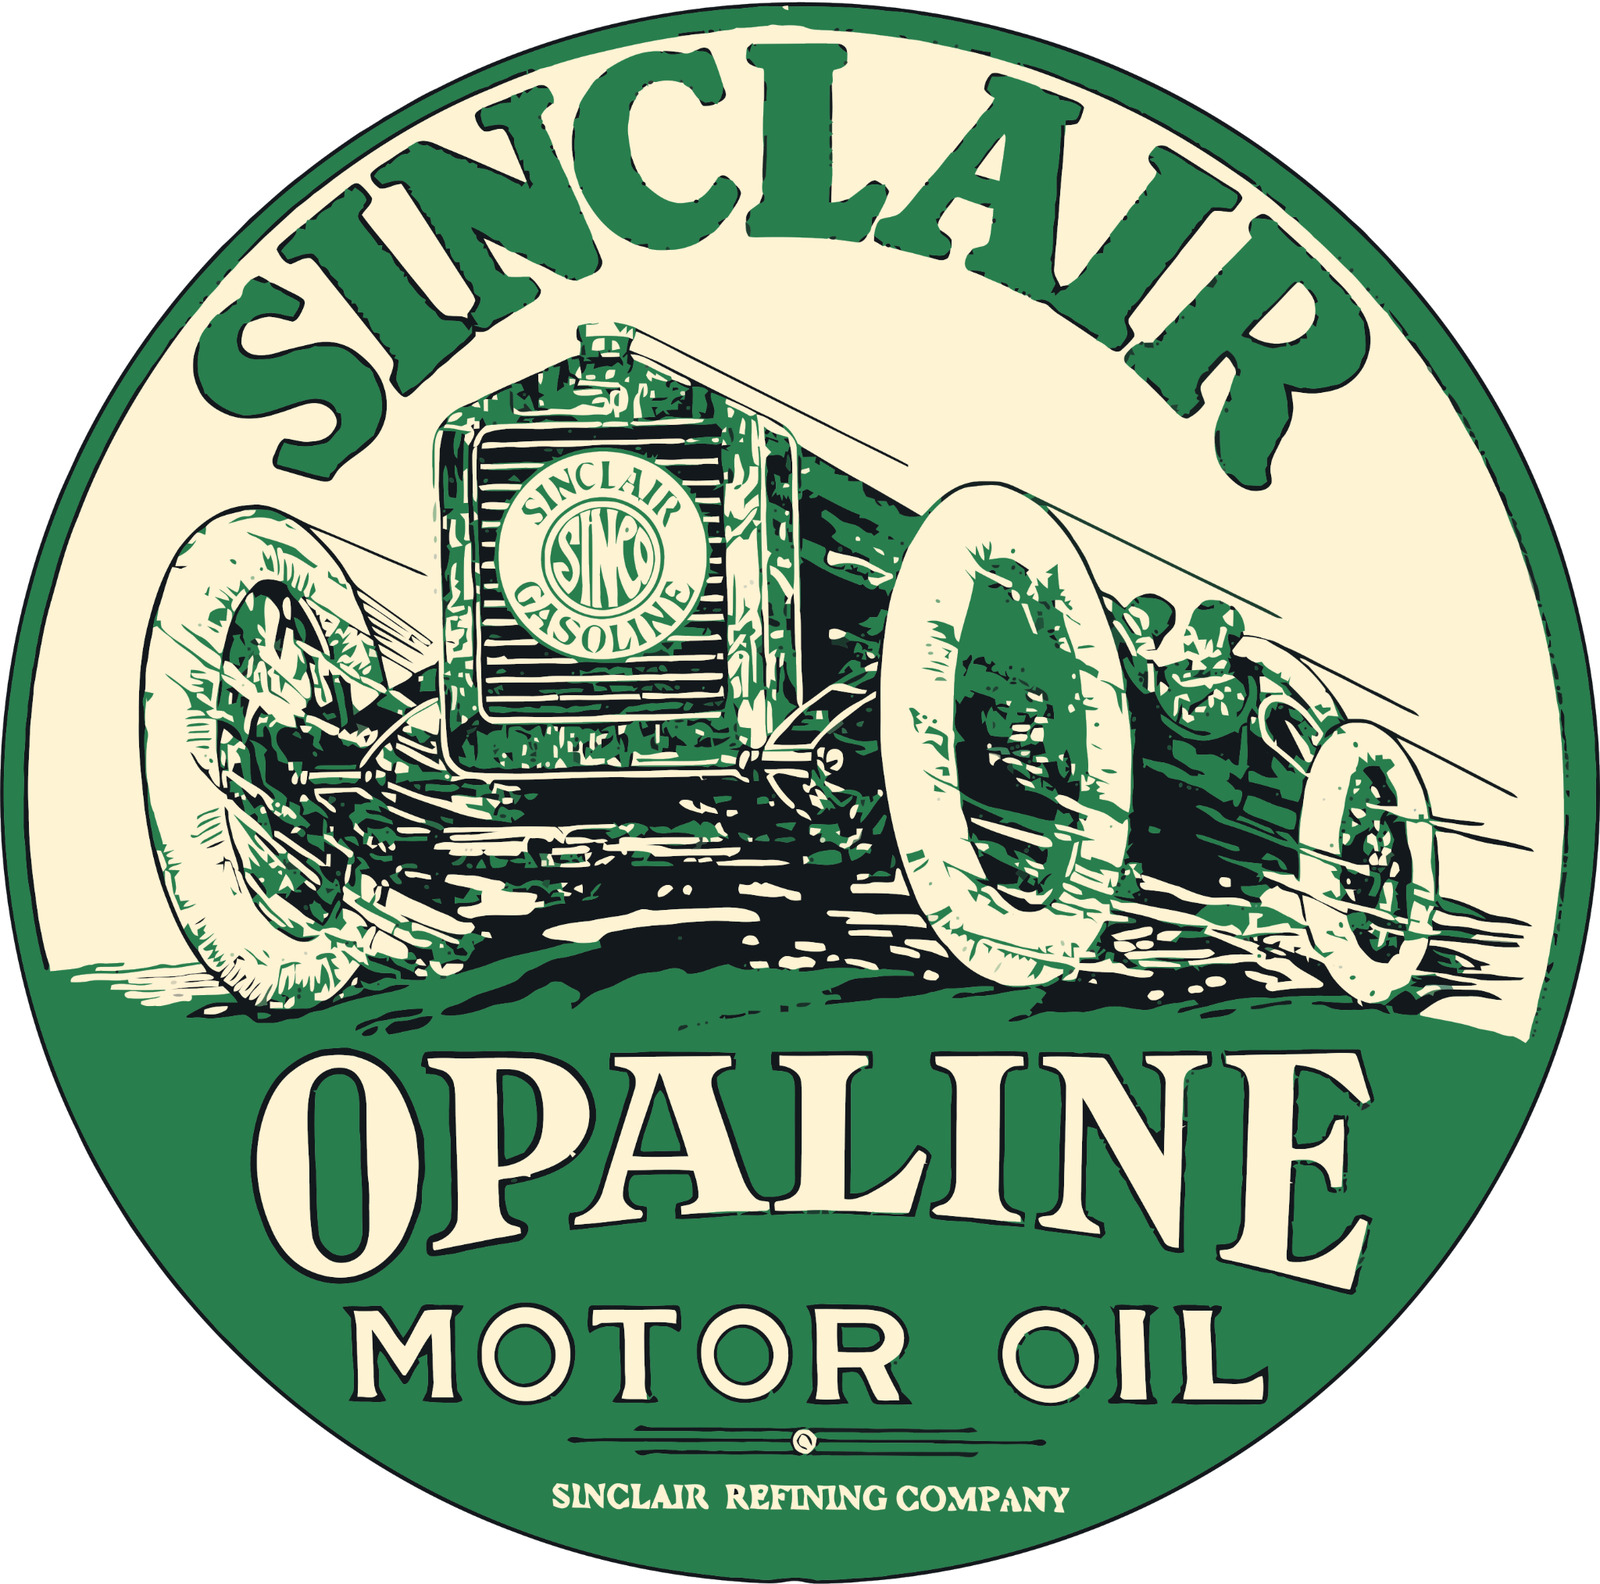 Sinclair Oil Gas Opaline Sticker Vintage Vinyl Decal |10 Sizes with TRACKING